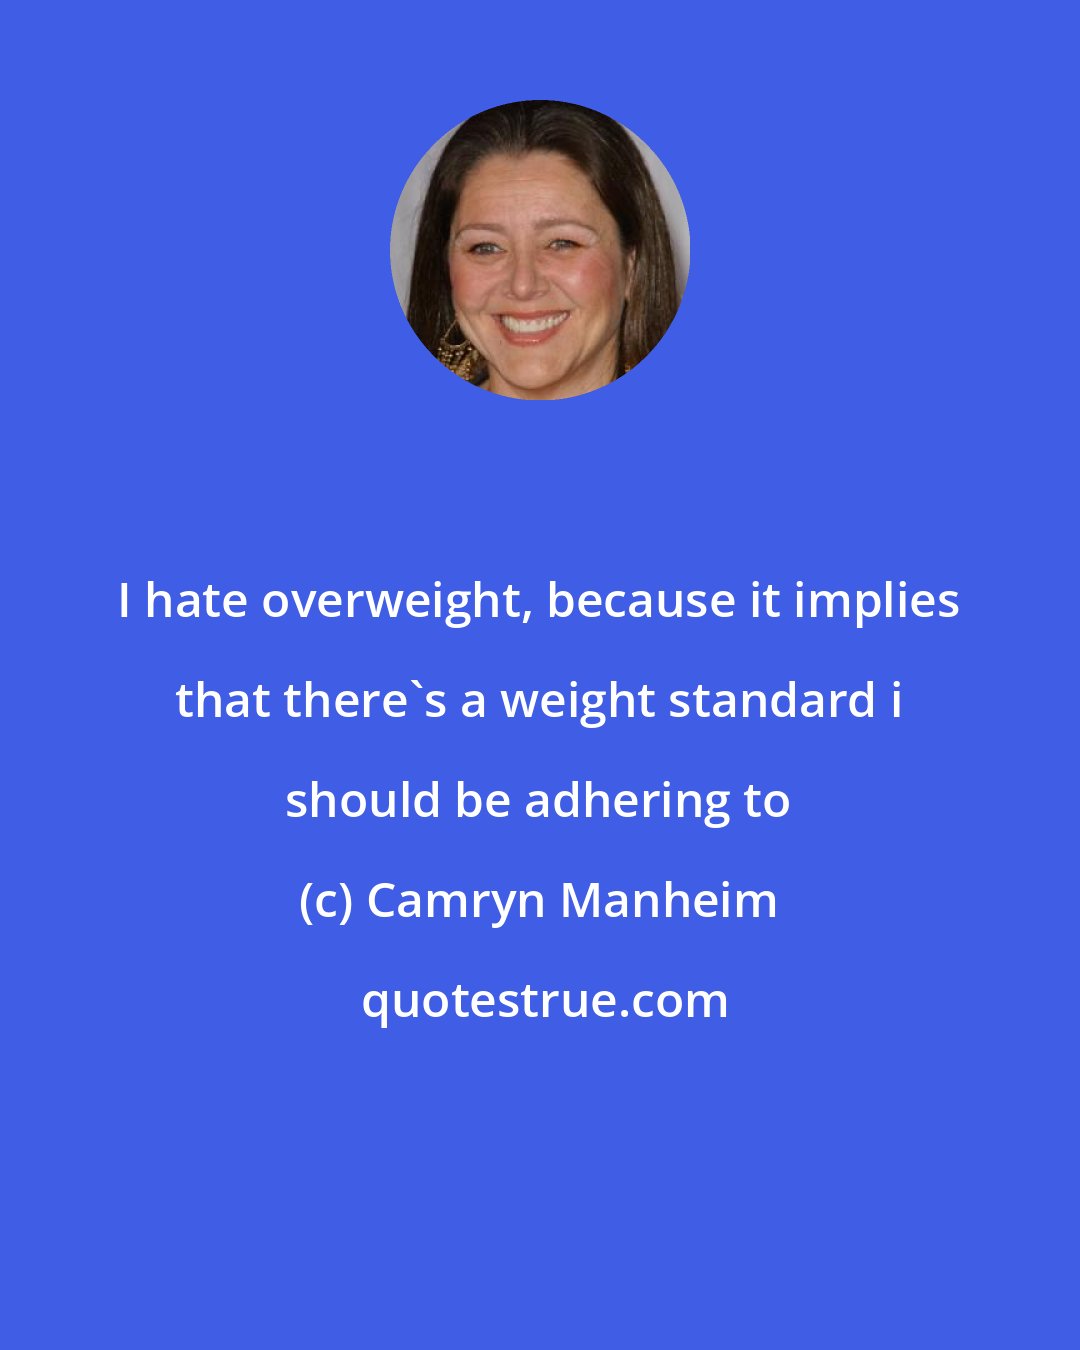 Camryn Manheim: I hate overweight, because it implies that there's a weight standard i should be adhering to